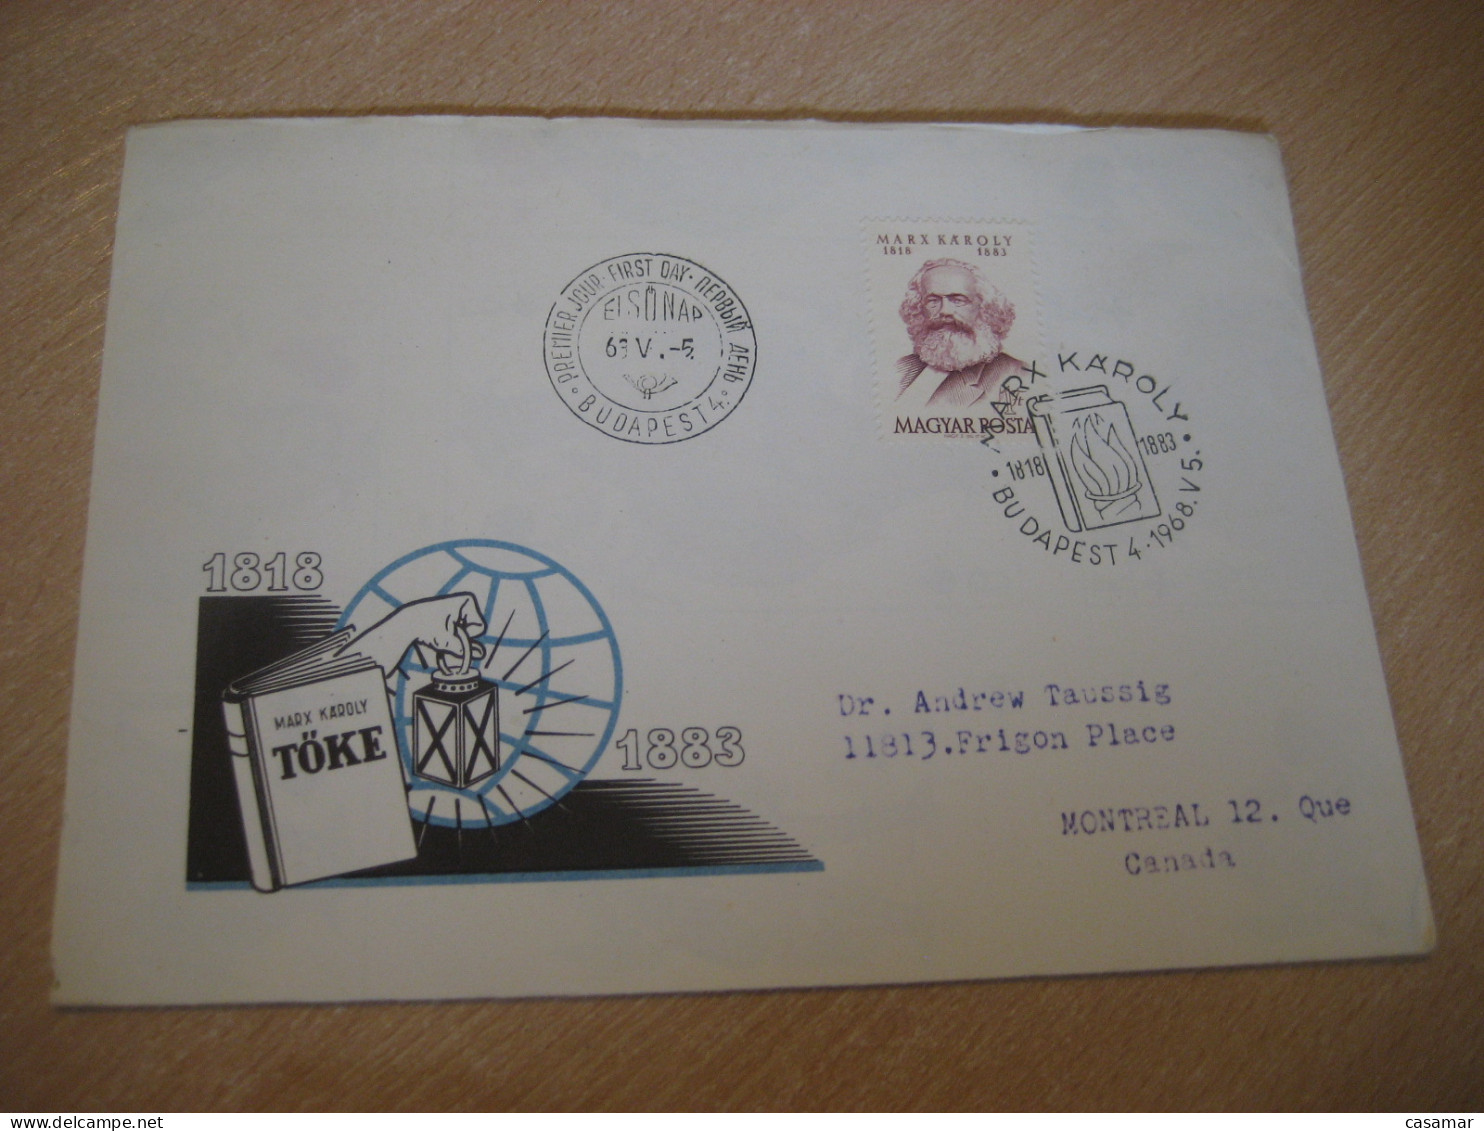 BUDAPEST 1968 To Montreal Canada KARL MARX Yv 1965 FDC Cancel Cover HUNGARY - Karl Marx